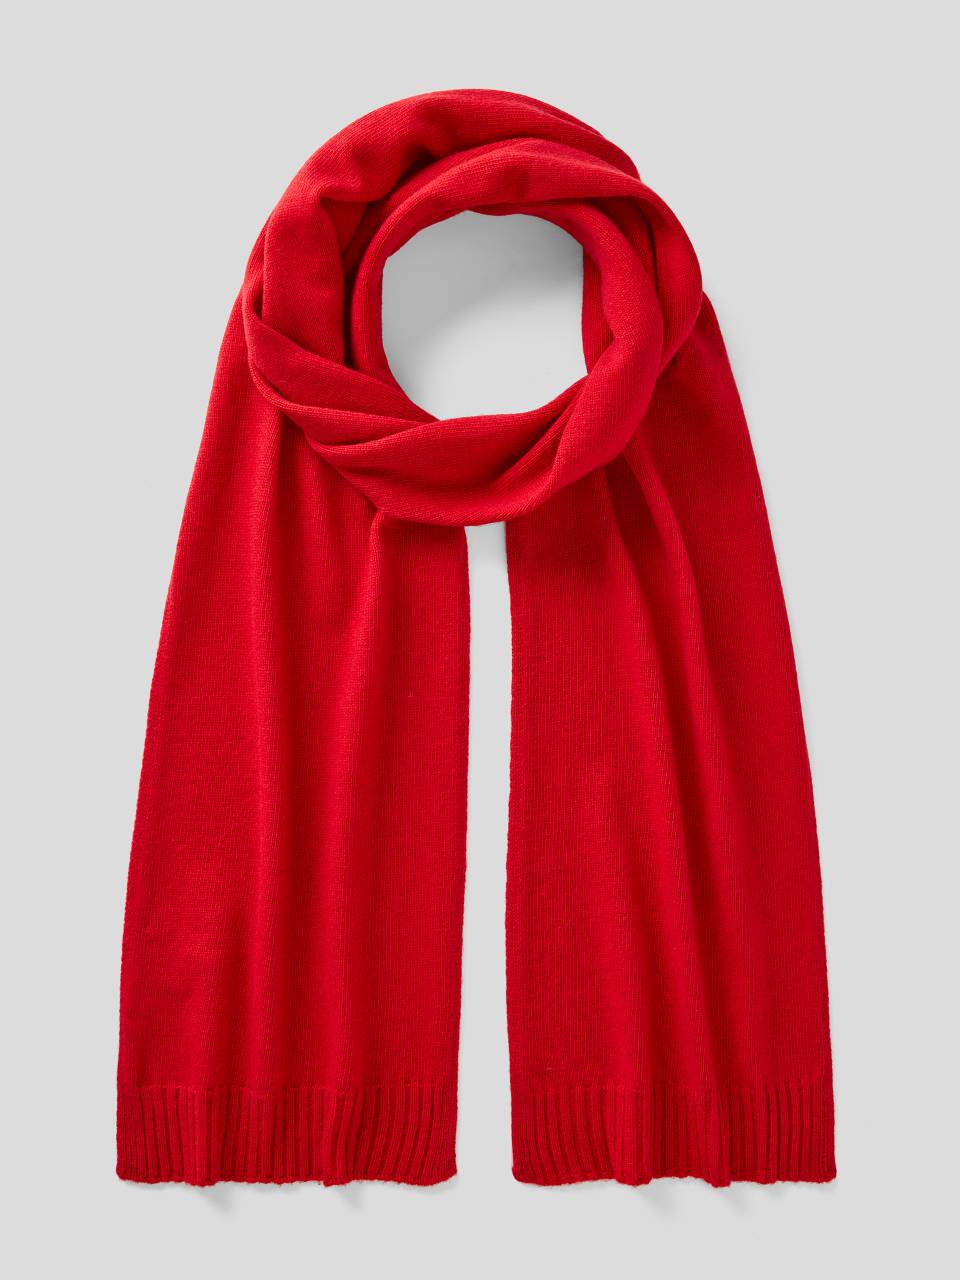 Benetton Scarf in wool and cashmere blend. 1